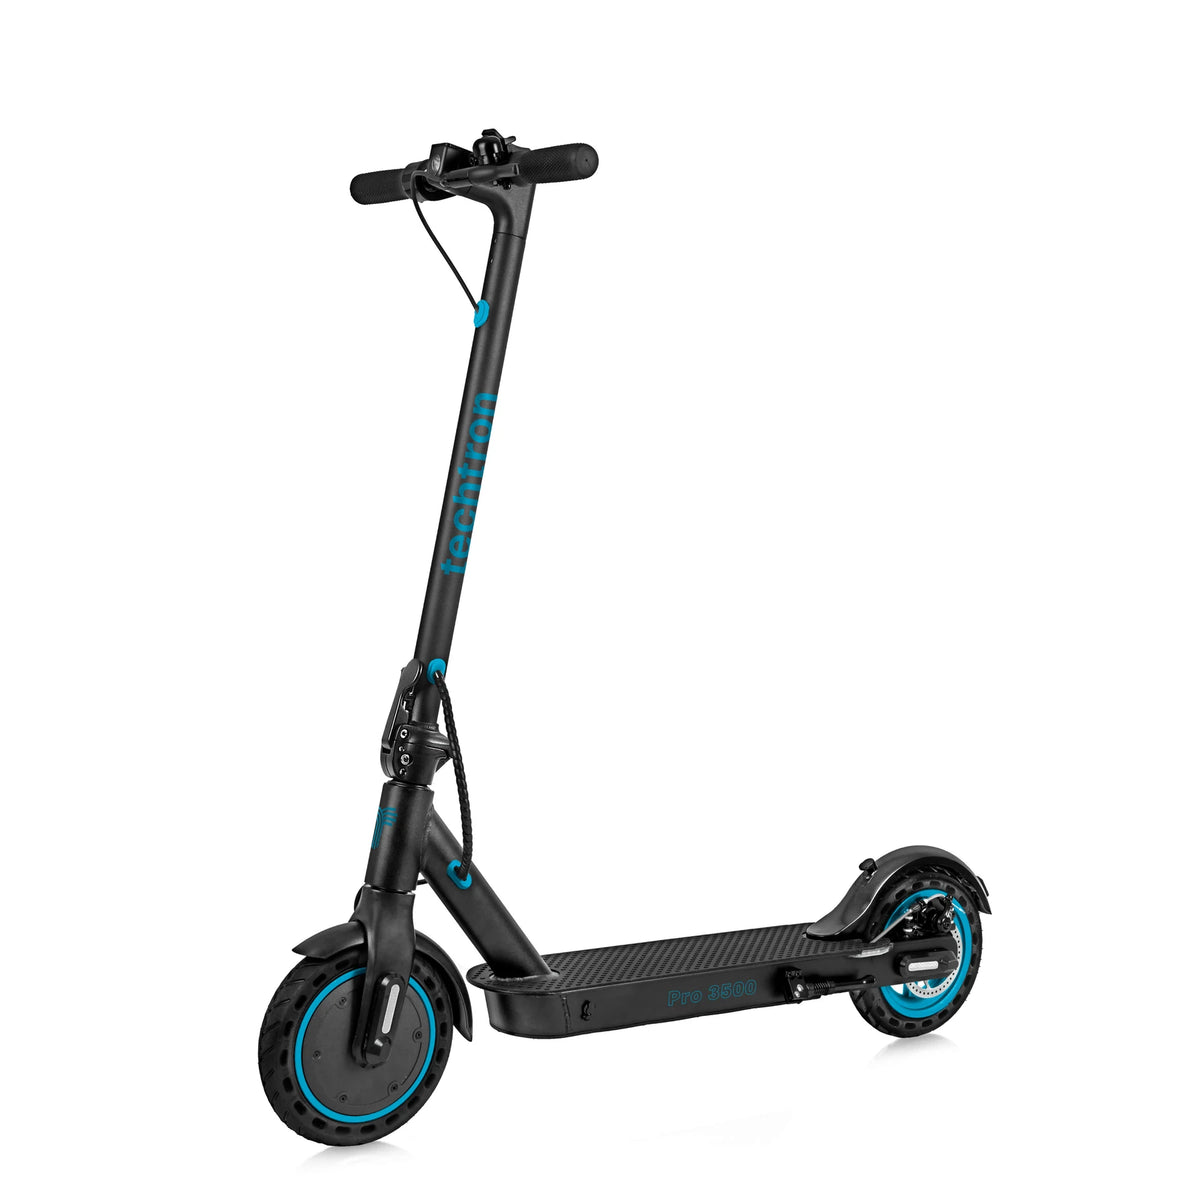 techtron® Pro 3500 Electric Scooter-Electric Scooters London